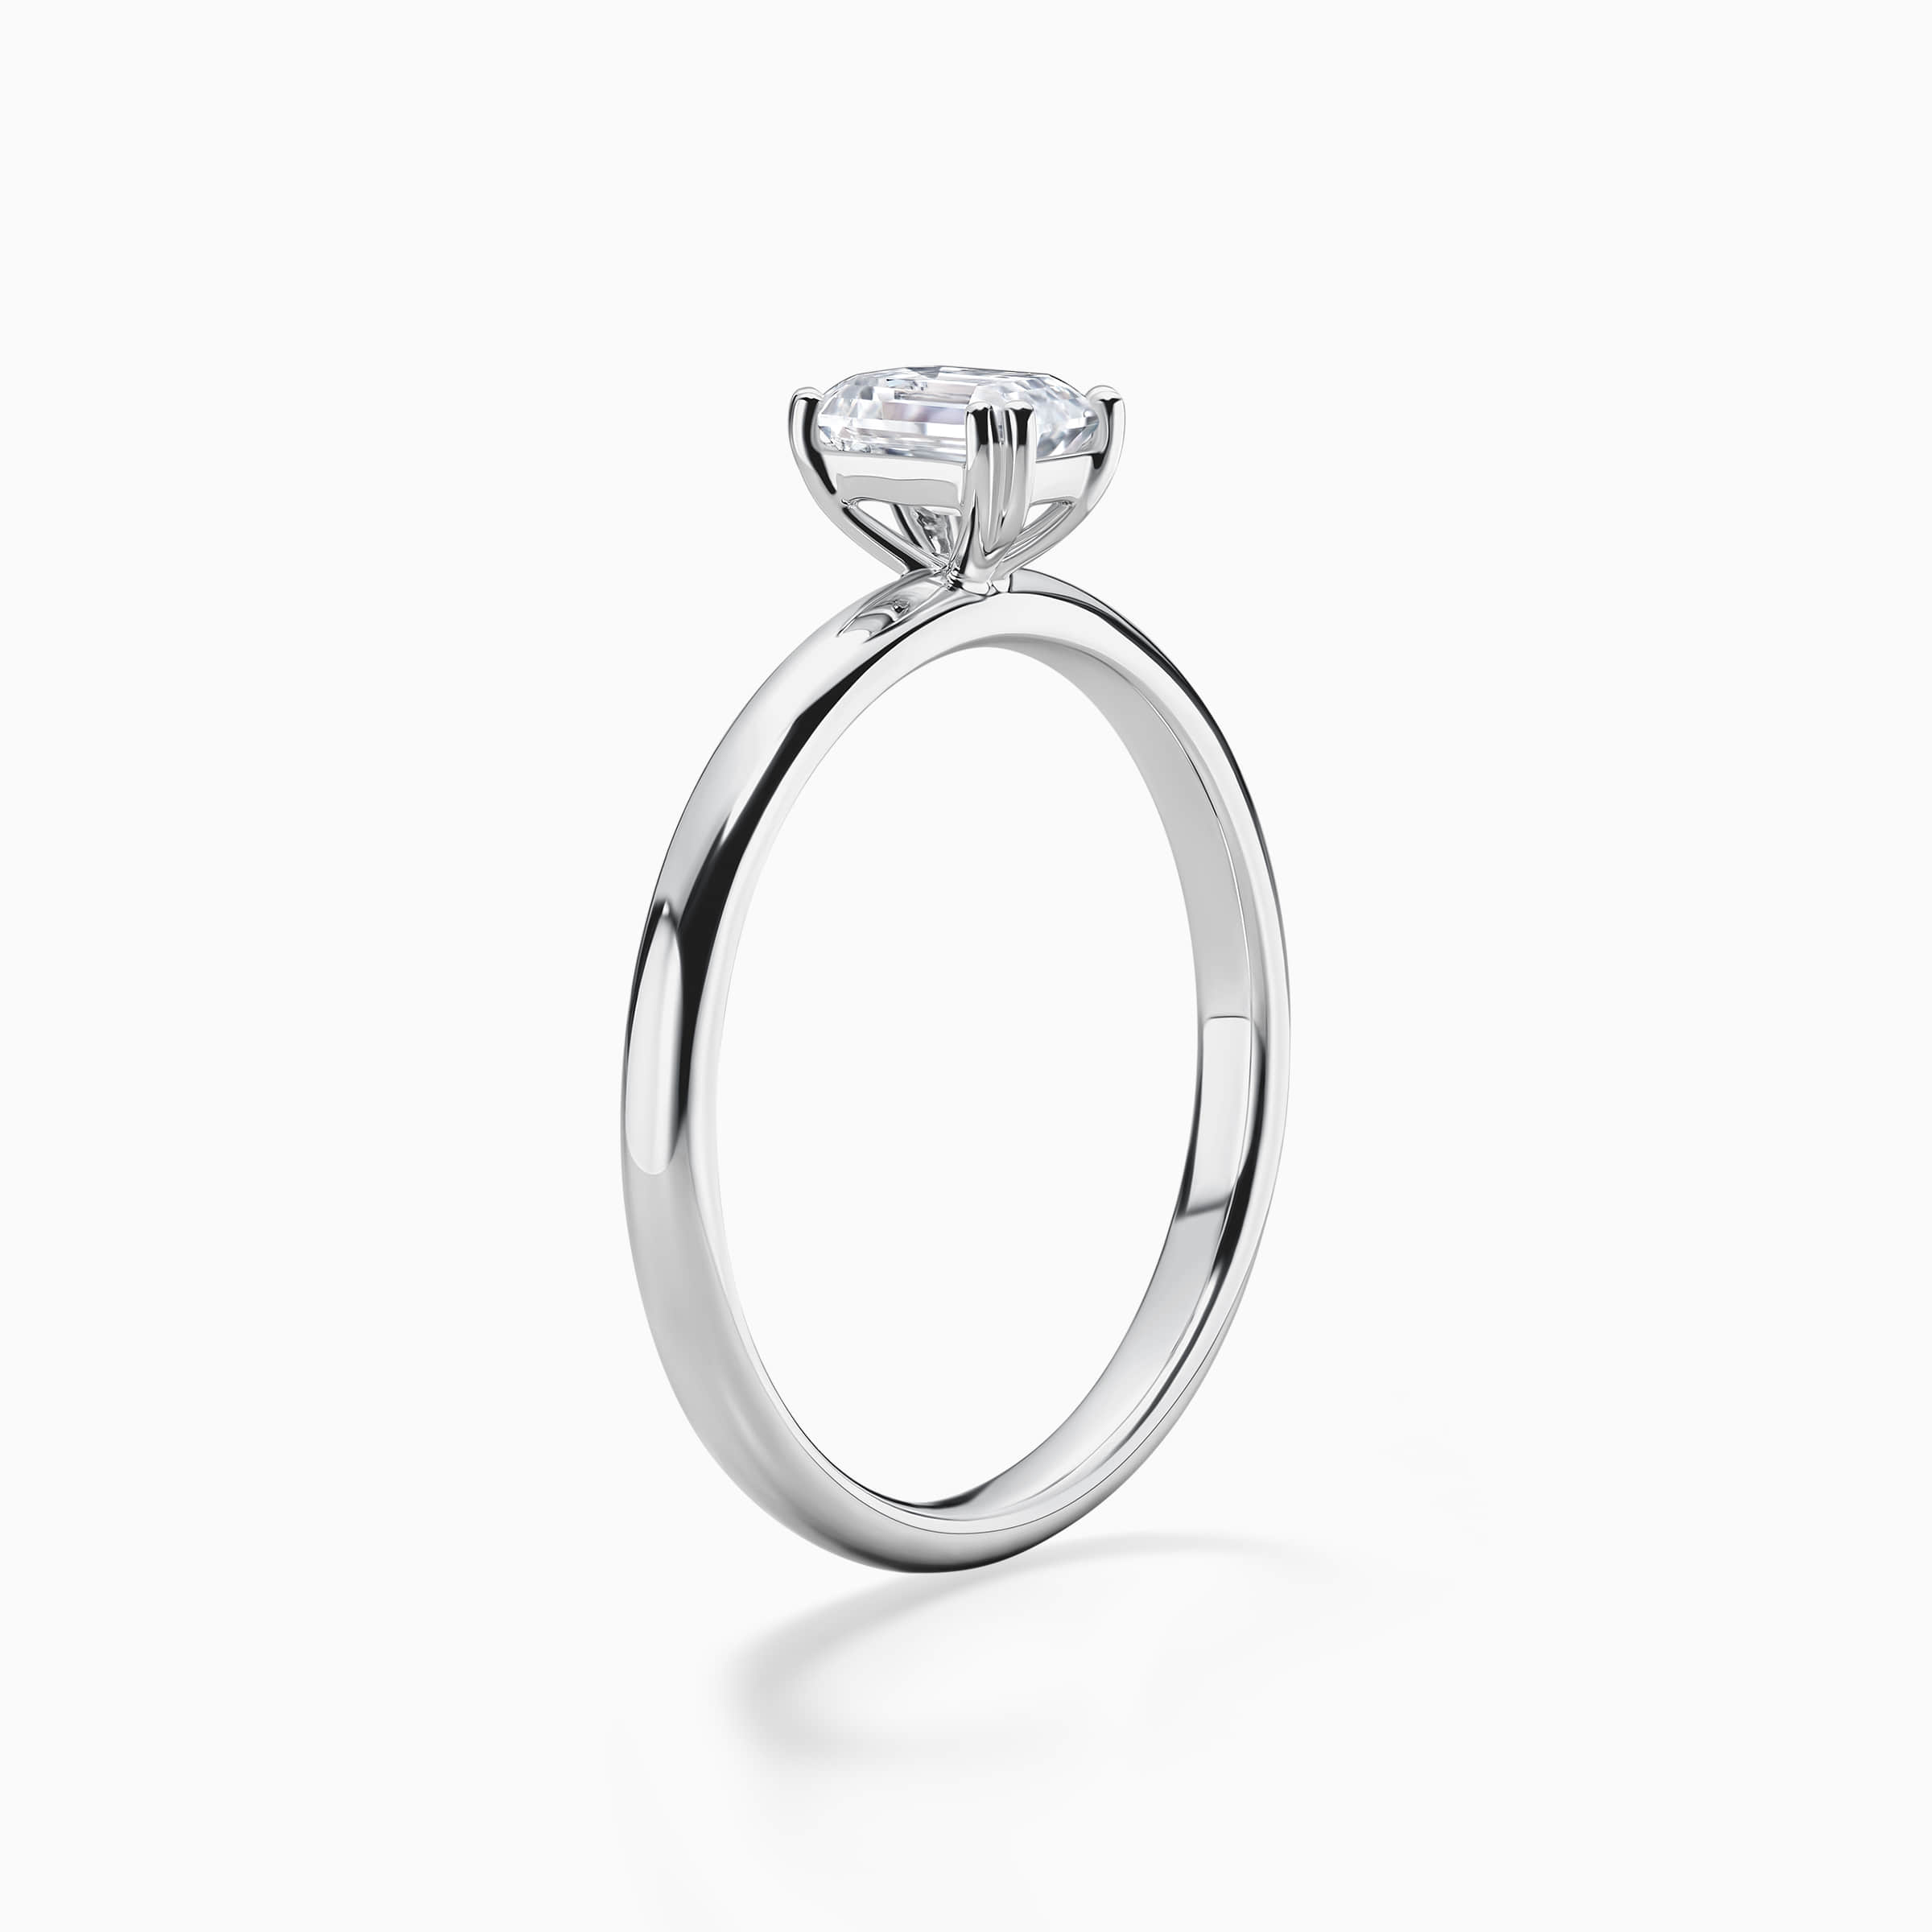 Darry Ring emerald cut diamond engagement ring side view